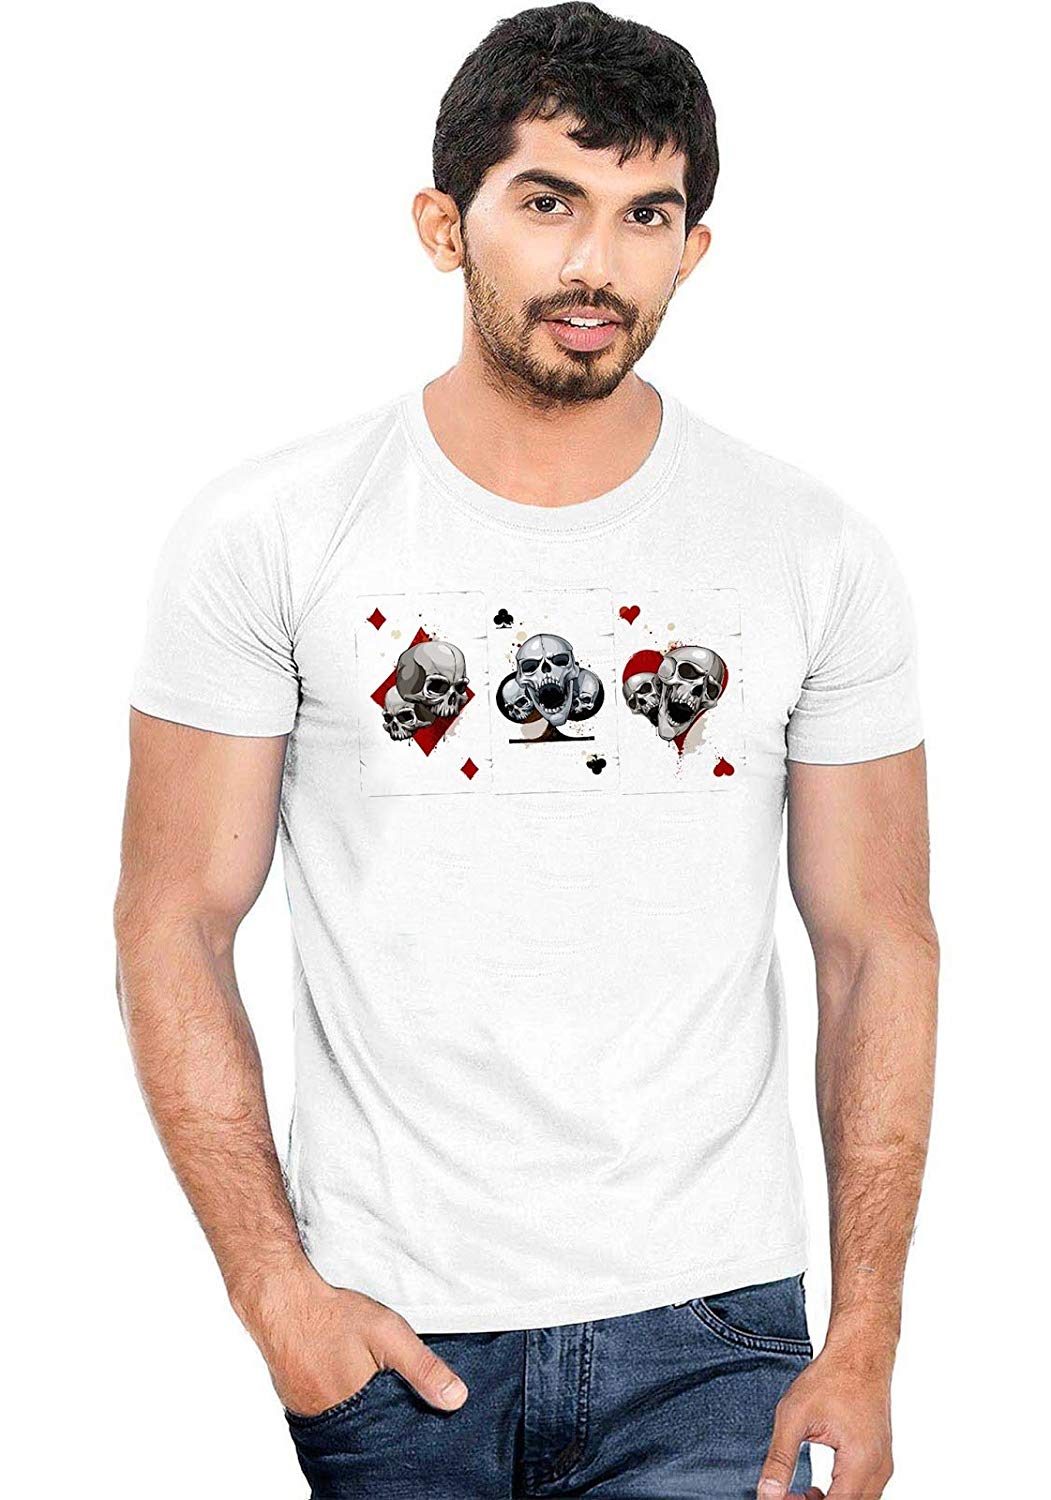 DOUBLE F ROUND NECK HALF SLEEVE WHITE COLOR TASH PRINTED T-SHIRT FOR MEN